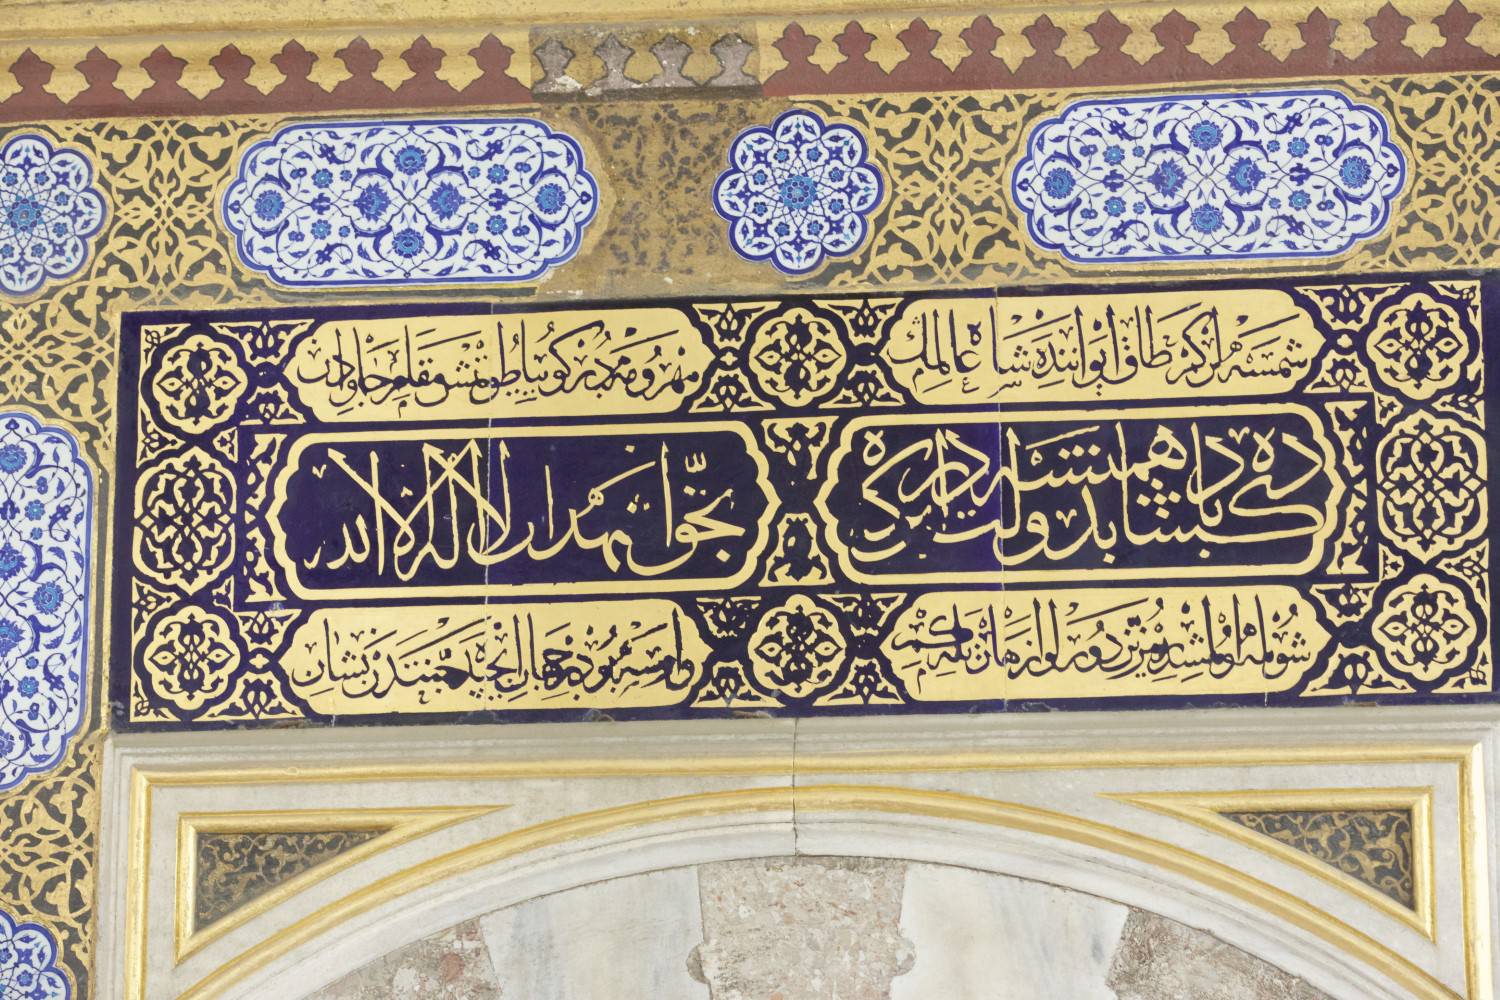 Inscription in black and gold above the entrance, embellished by blue and white tiles with floral design